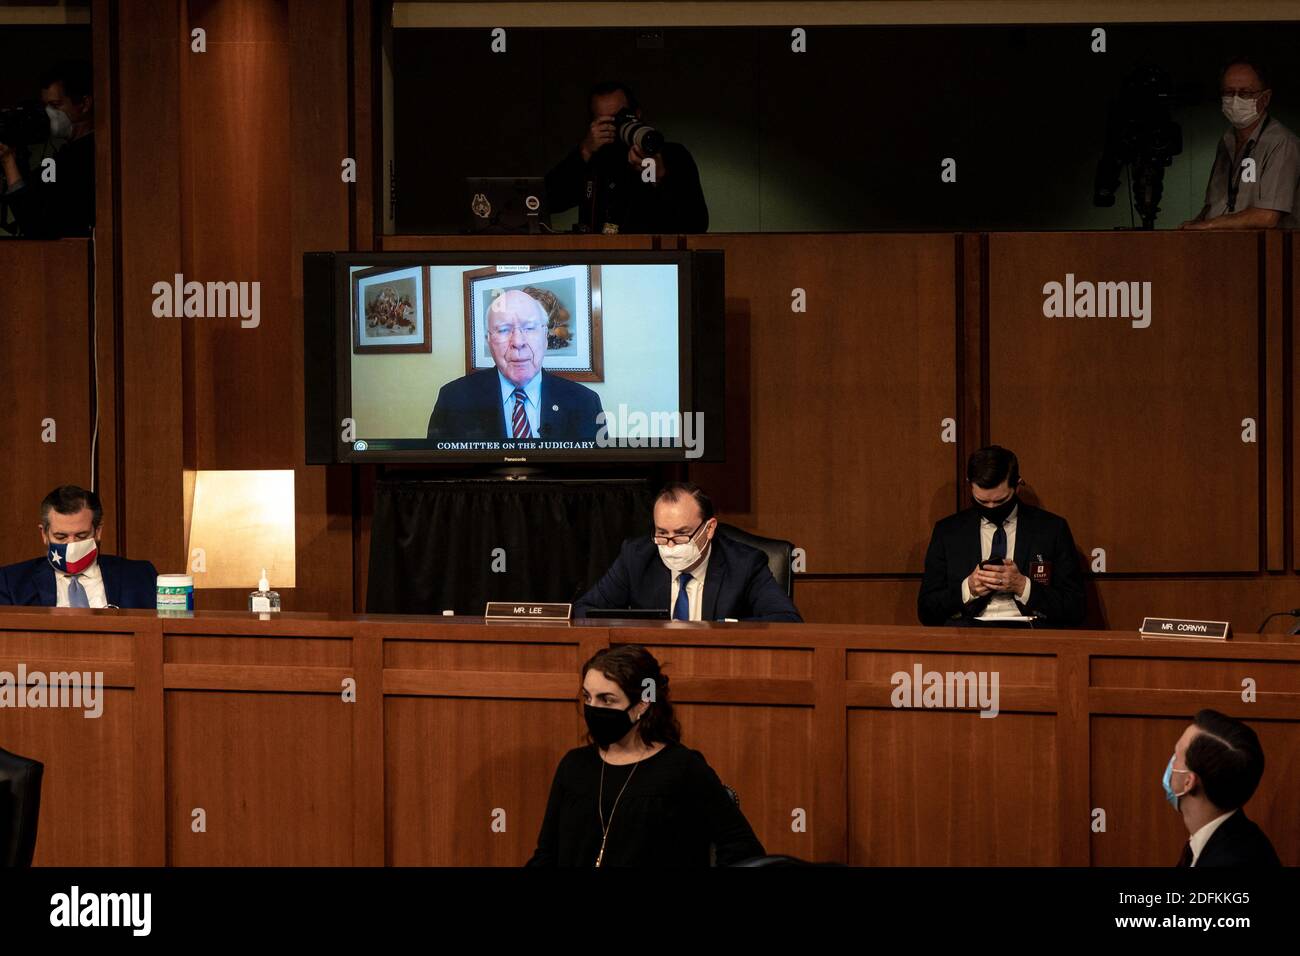 Senator Patrick Leahy (D-VT) is seen speaking on a tv remotely during Judge Amy Coney Barrett's Senate confirmation hearing to the Supreme Court on Capitol Hill in Washington, DC on October 13, 2020. Photo by Erin Schaff/Pool/ABACAPRESS.COMNYTACB Stock Photo